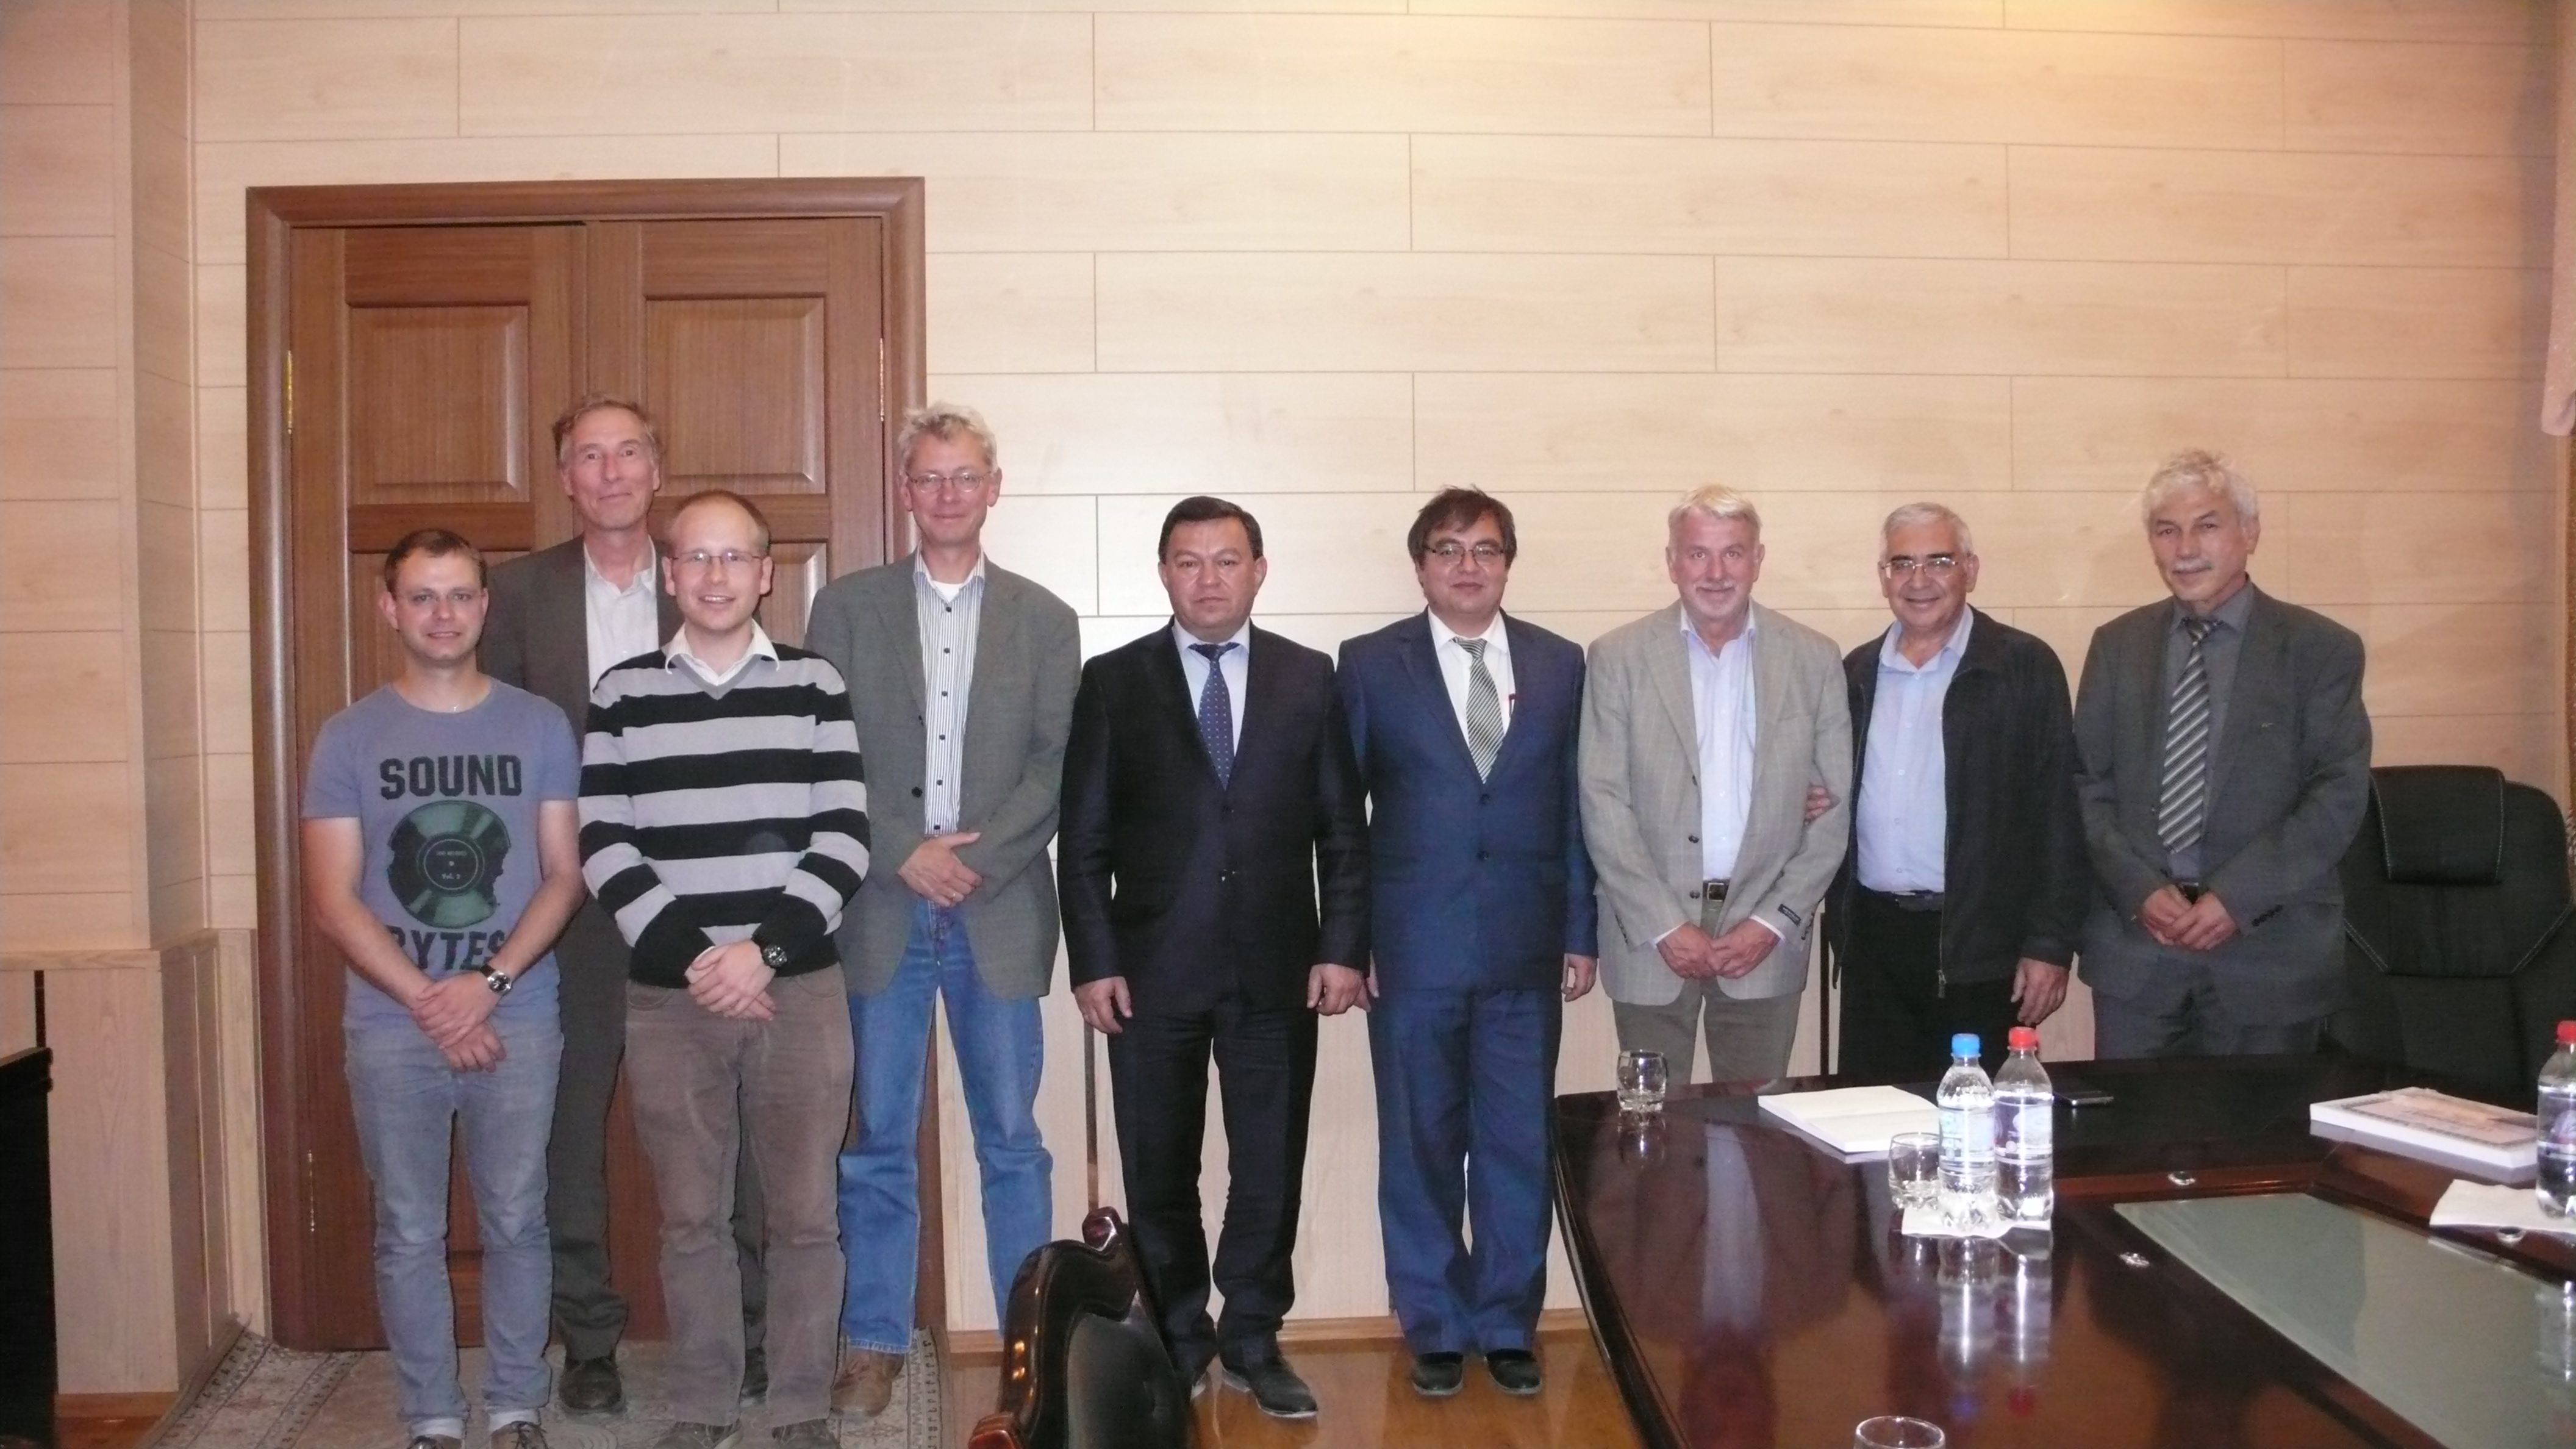 Meeting with the president of the Academy of Sciences of Tajikistan, Prof. Dr. Farhod Rahimi. The scientists discussed the CADEX project and possible further cooperations.
From left to right: Dr. Bernd Heinold, Dr. Dietrich Althausen, Julian Hofer, Prof. Dr. Andreas Macke (TROPOS), Prof. Dr. Farhod Rahimi, Prof. Dr. Khikmat Kh. Muminov, (Academy of Sciences of Tajikistan), Dr. Georg Schettler (GFZ Potsdam), Dr. Bakhron Nazarov, Dr. Sabur F. Abdullaev (Academy of Sciences of Tajikistan).
Photo: Academy of Sciences of Tajikistan